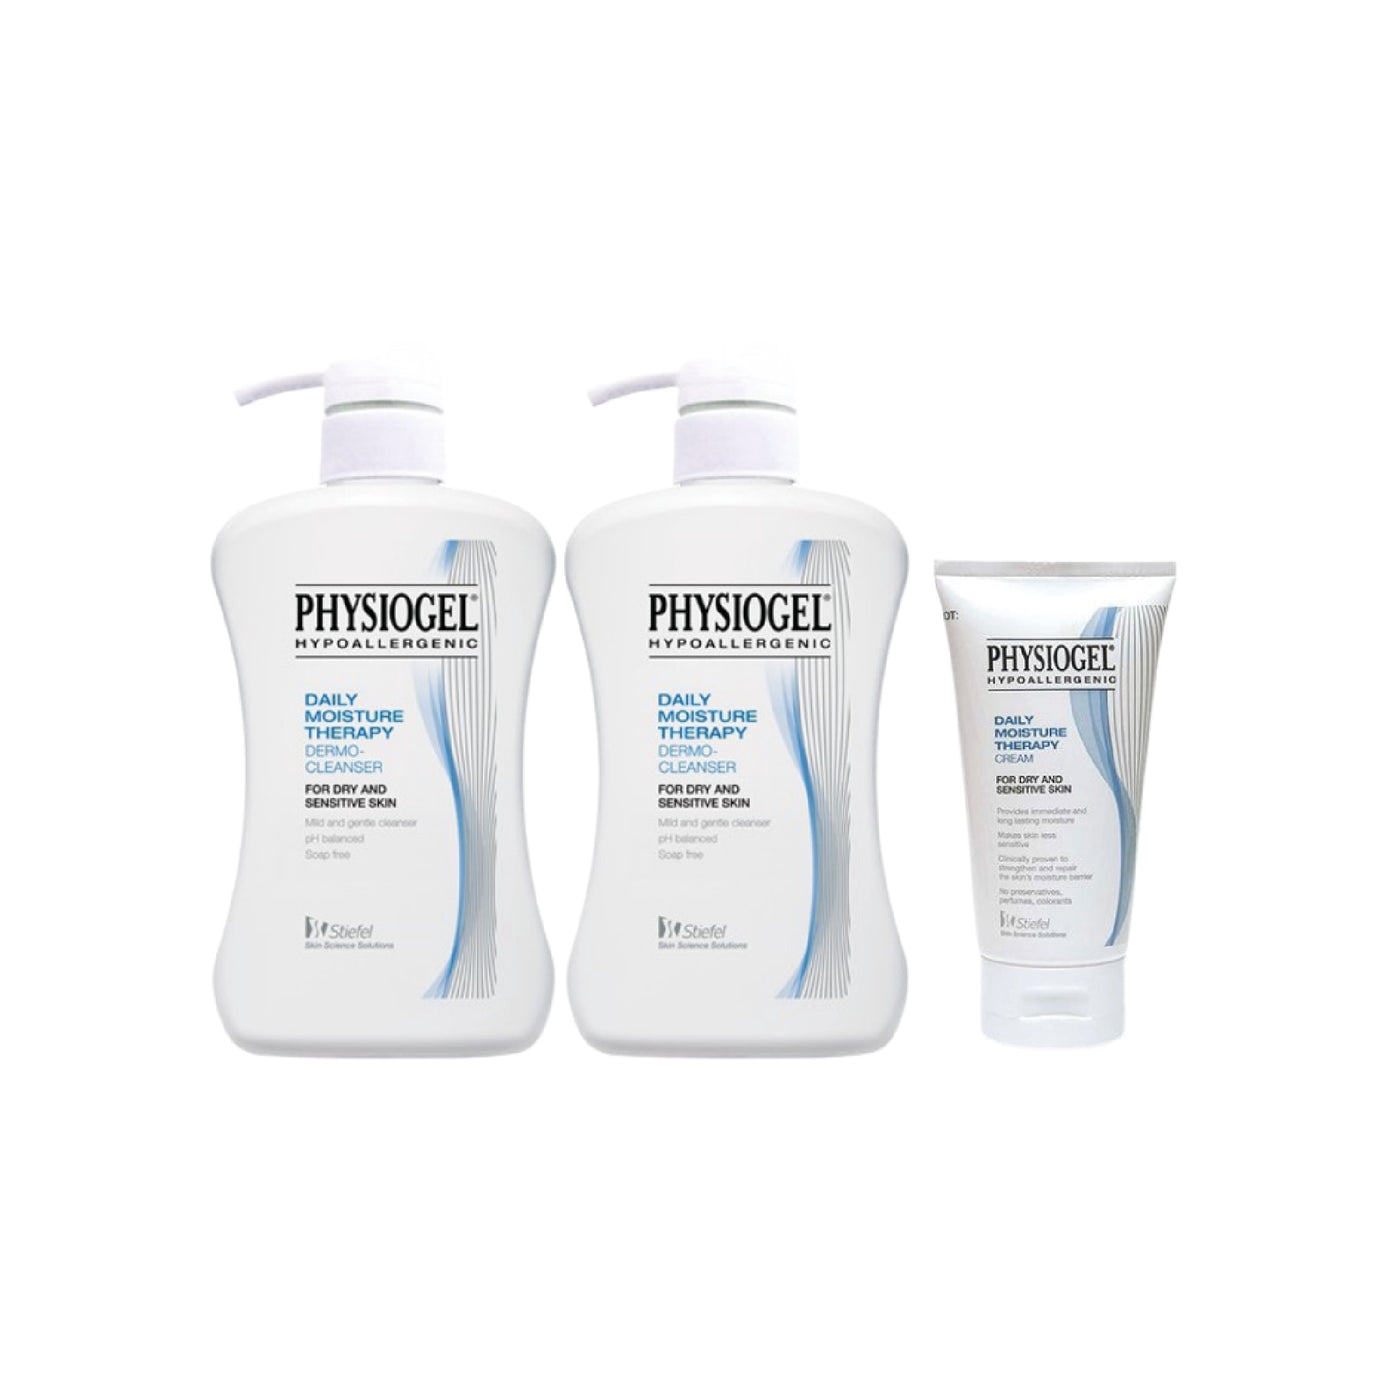 PHYSIOGEL CLEANSER 500ml x 2 FREE DAILY MOISTURE THERAPY CREAM 75ml